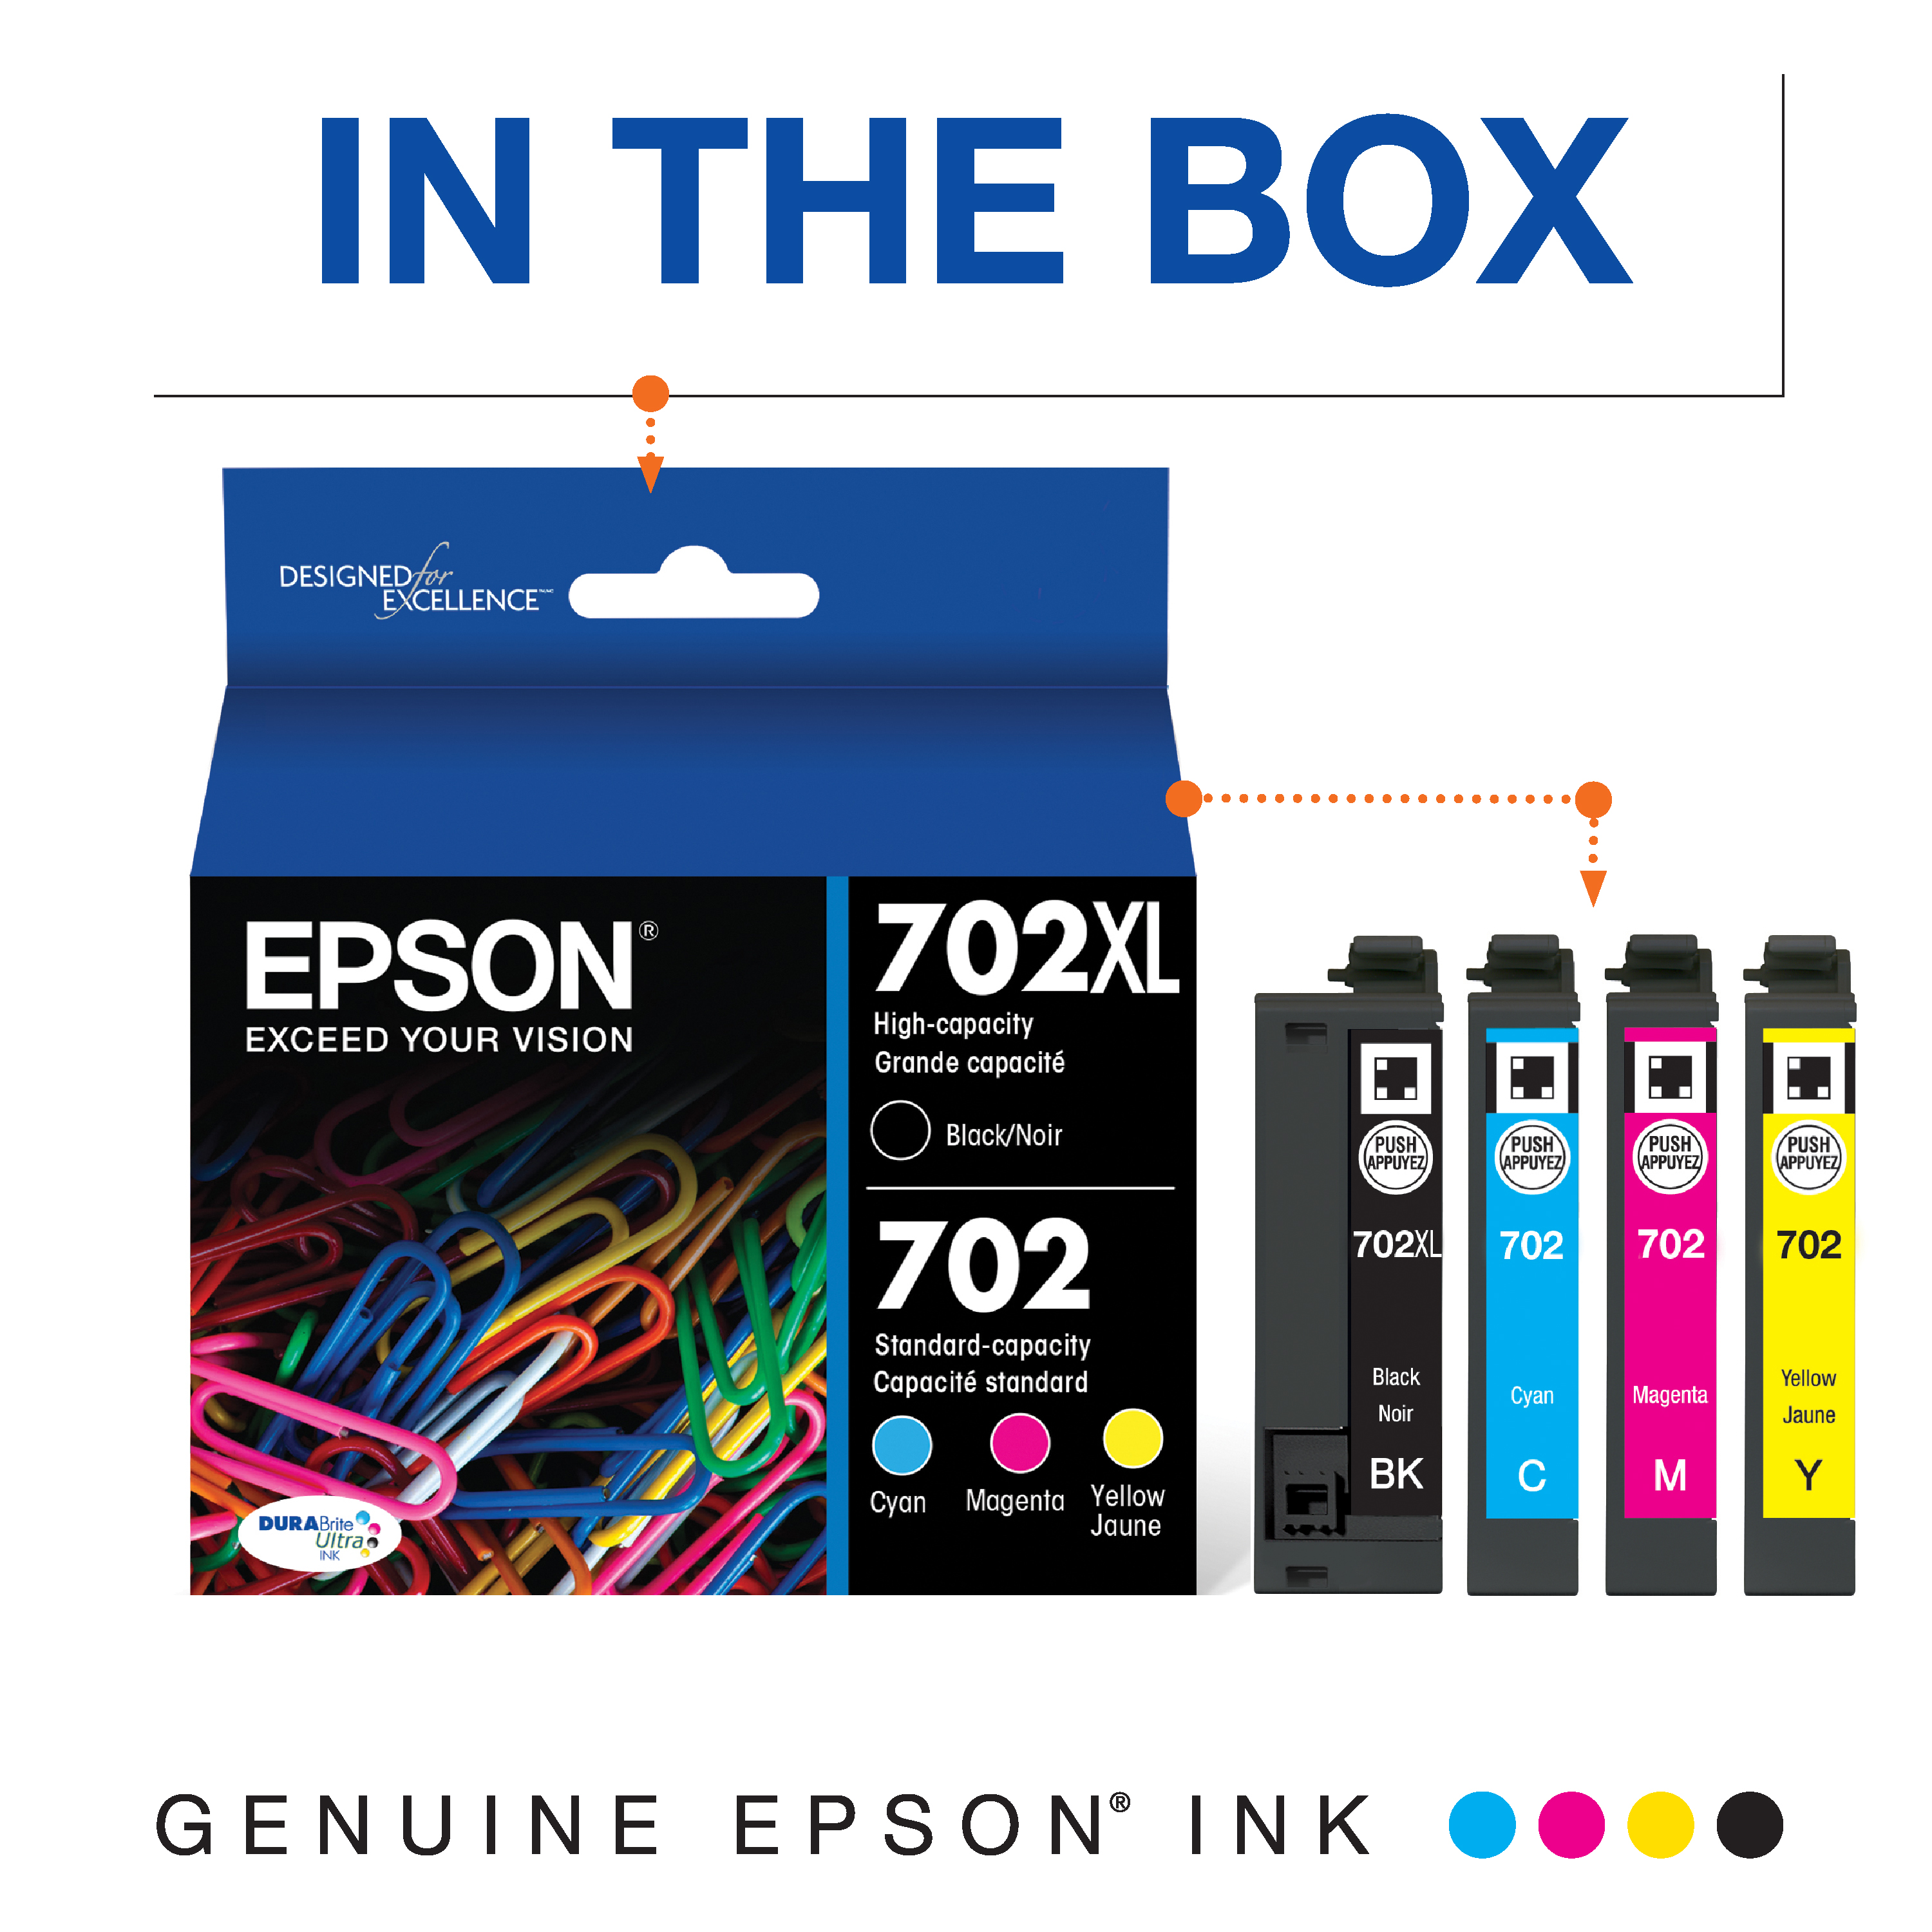 EPSON 702 DURABrite Ultra Ink High Capacity Black & Standard Color Cartridge Combo Pack (T702XL-BCS) Works with WorkForce Pro WF-3720, WF-3730, WF-3733 - image 2 of 5